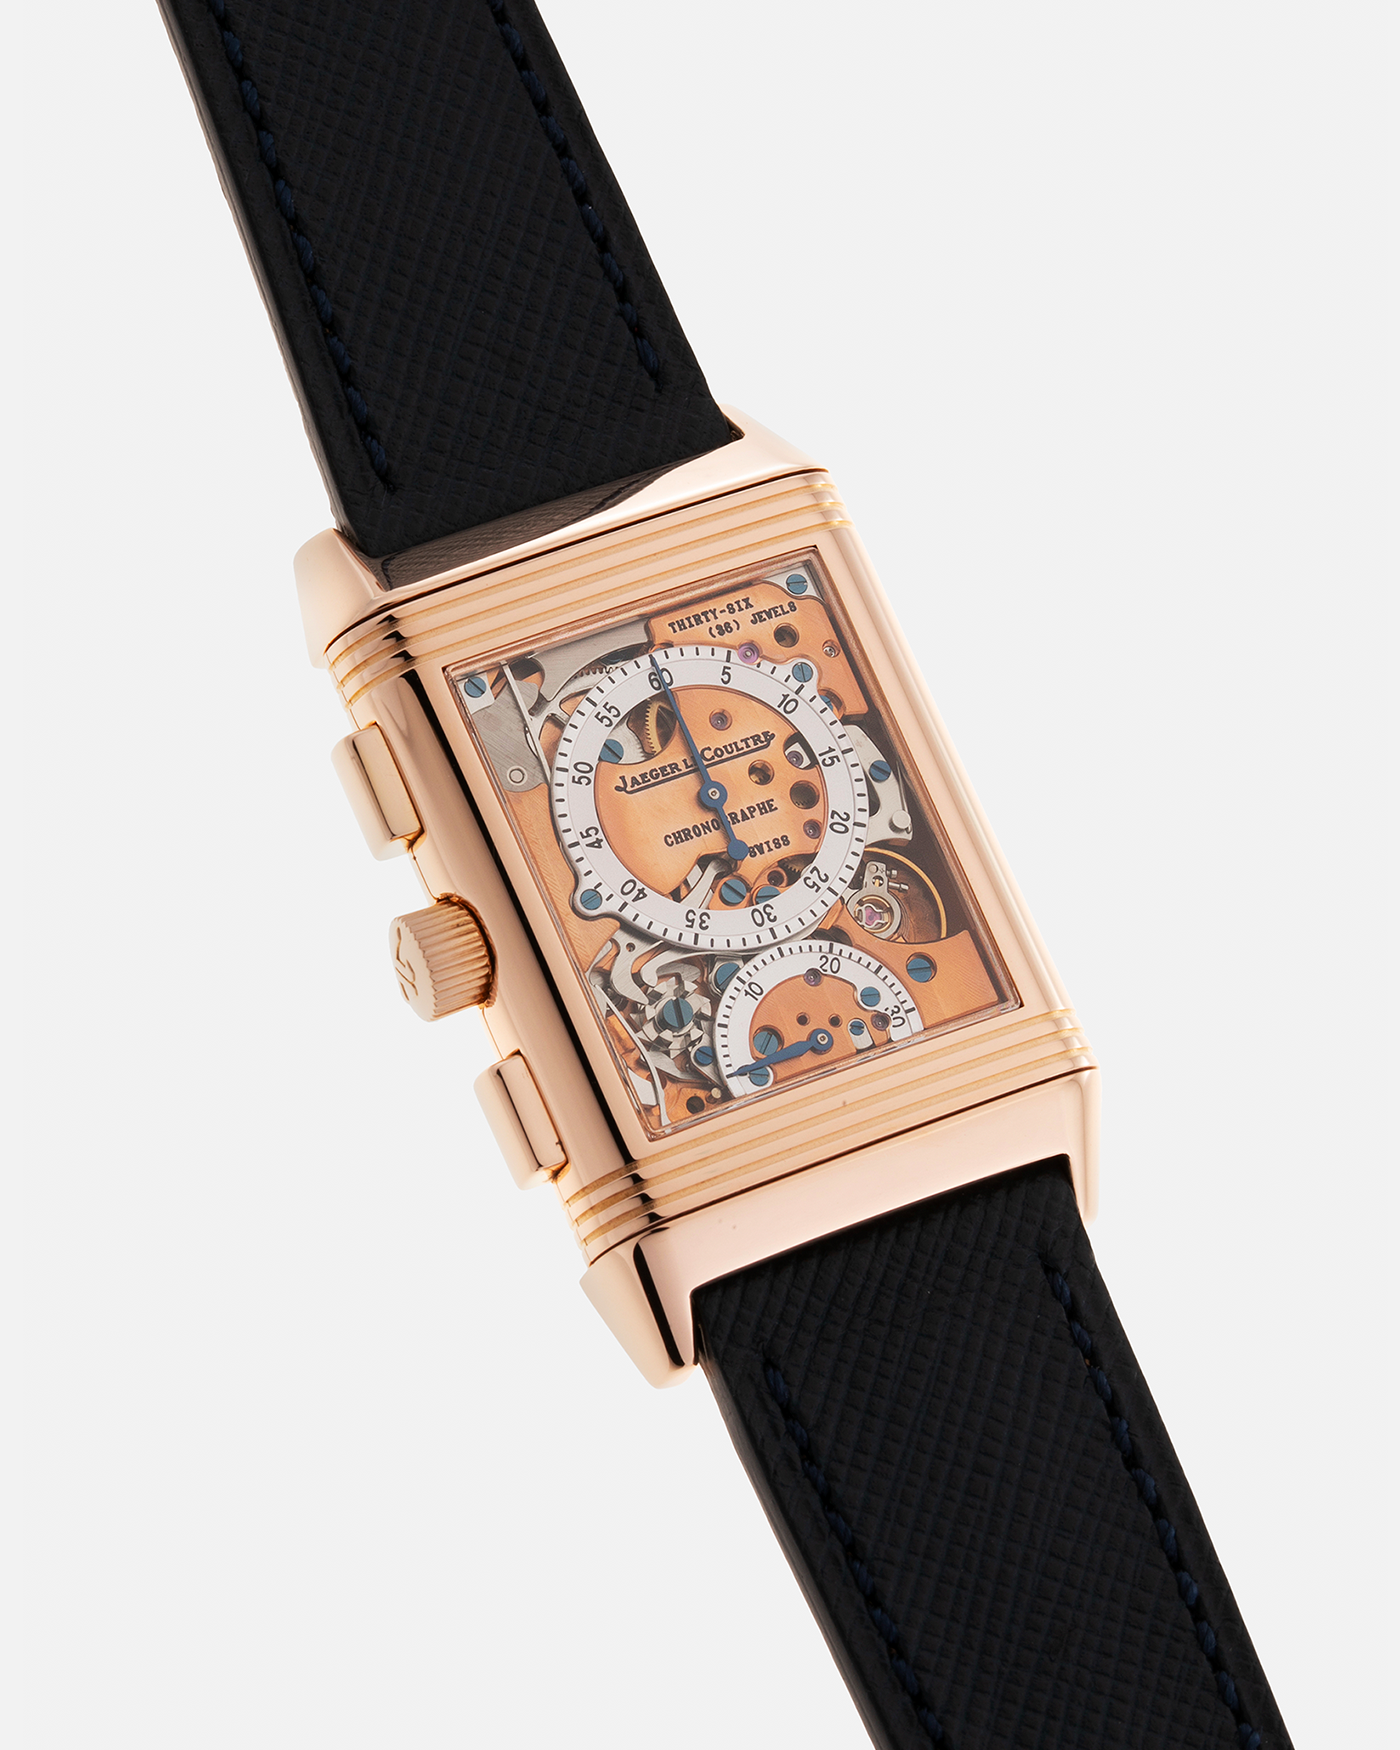 Brand: Jaeger LeCoultre Year: 1996 Model: Reverso Chronographe Retrograde, Limited to 500 pieces Reference: 270.2.69 Material: 18-carat Rose Gold Movement: JLC Cal. 829, Manual-Wind Case Diameter: 42mm x 26mm x 9.5mm Strap: Molequin Navy Blue Textured Calf with Signed 18-carat Rose Gold Deployant Clasp